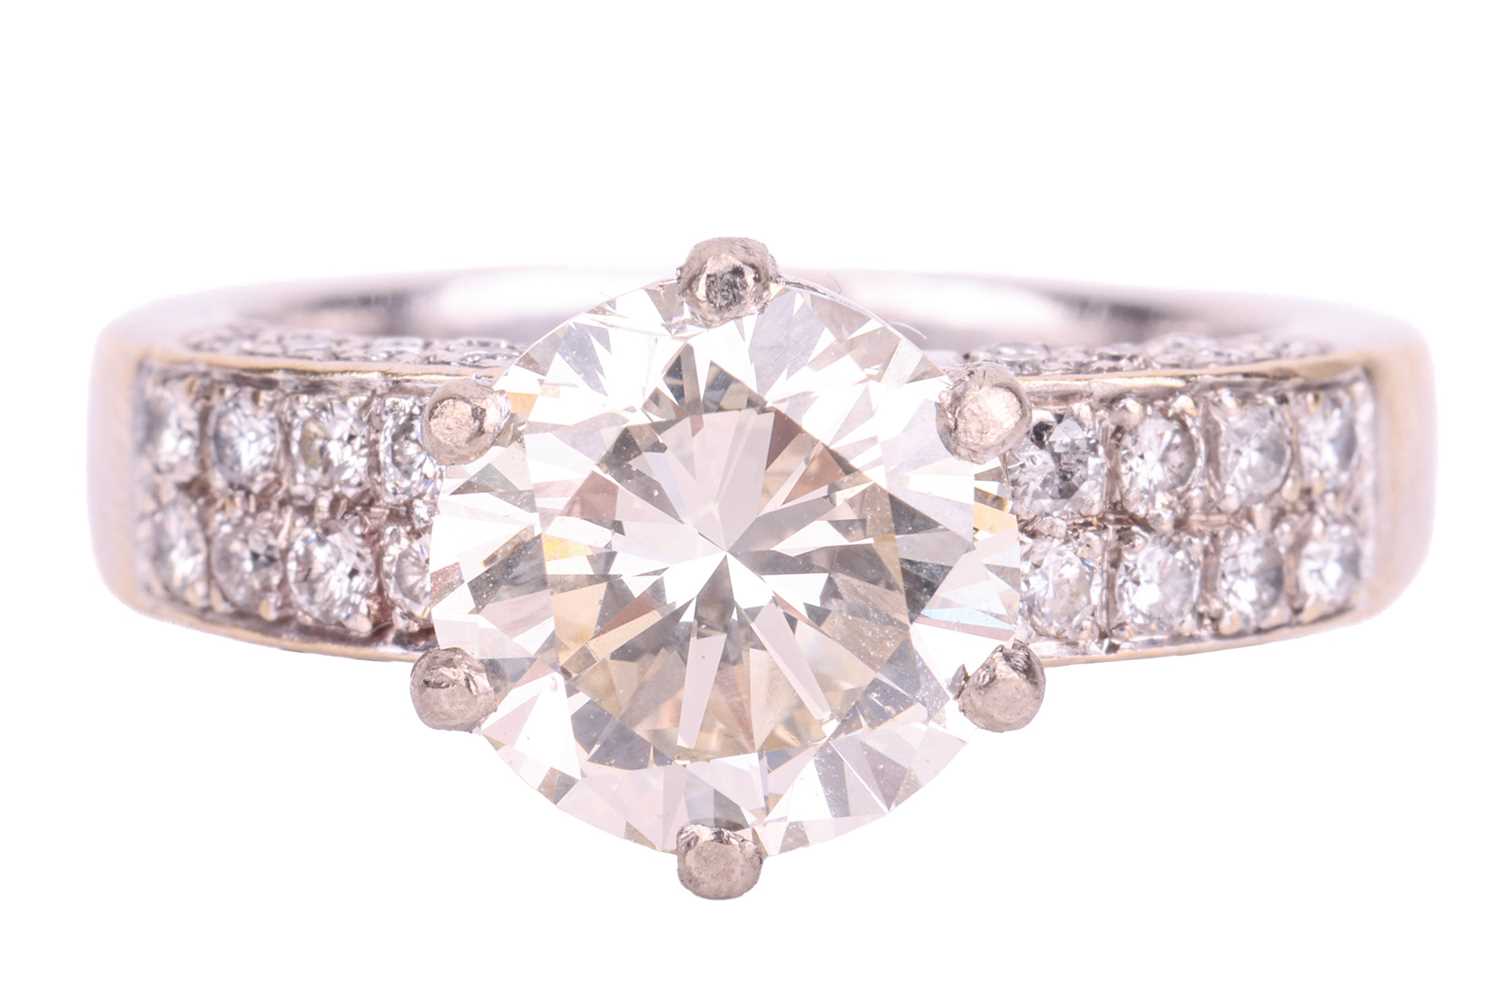 A diamond solitaire ring with diamond set shoulders, featuring a 3.02ct round brilliant cut diamond 